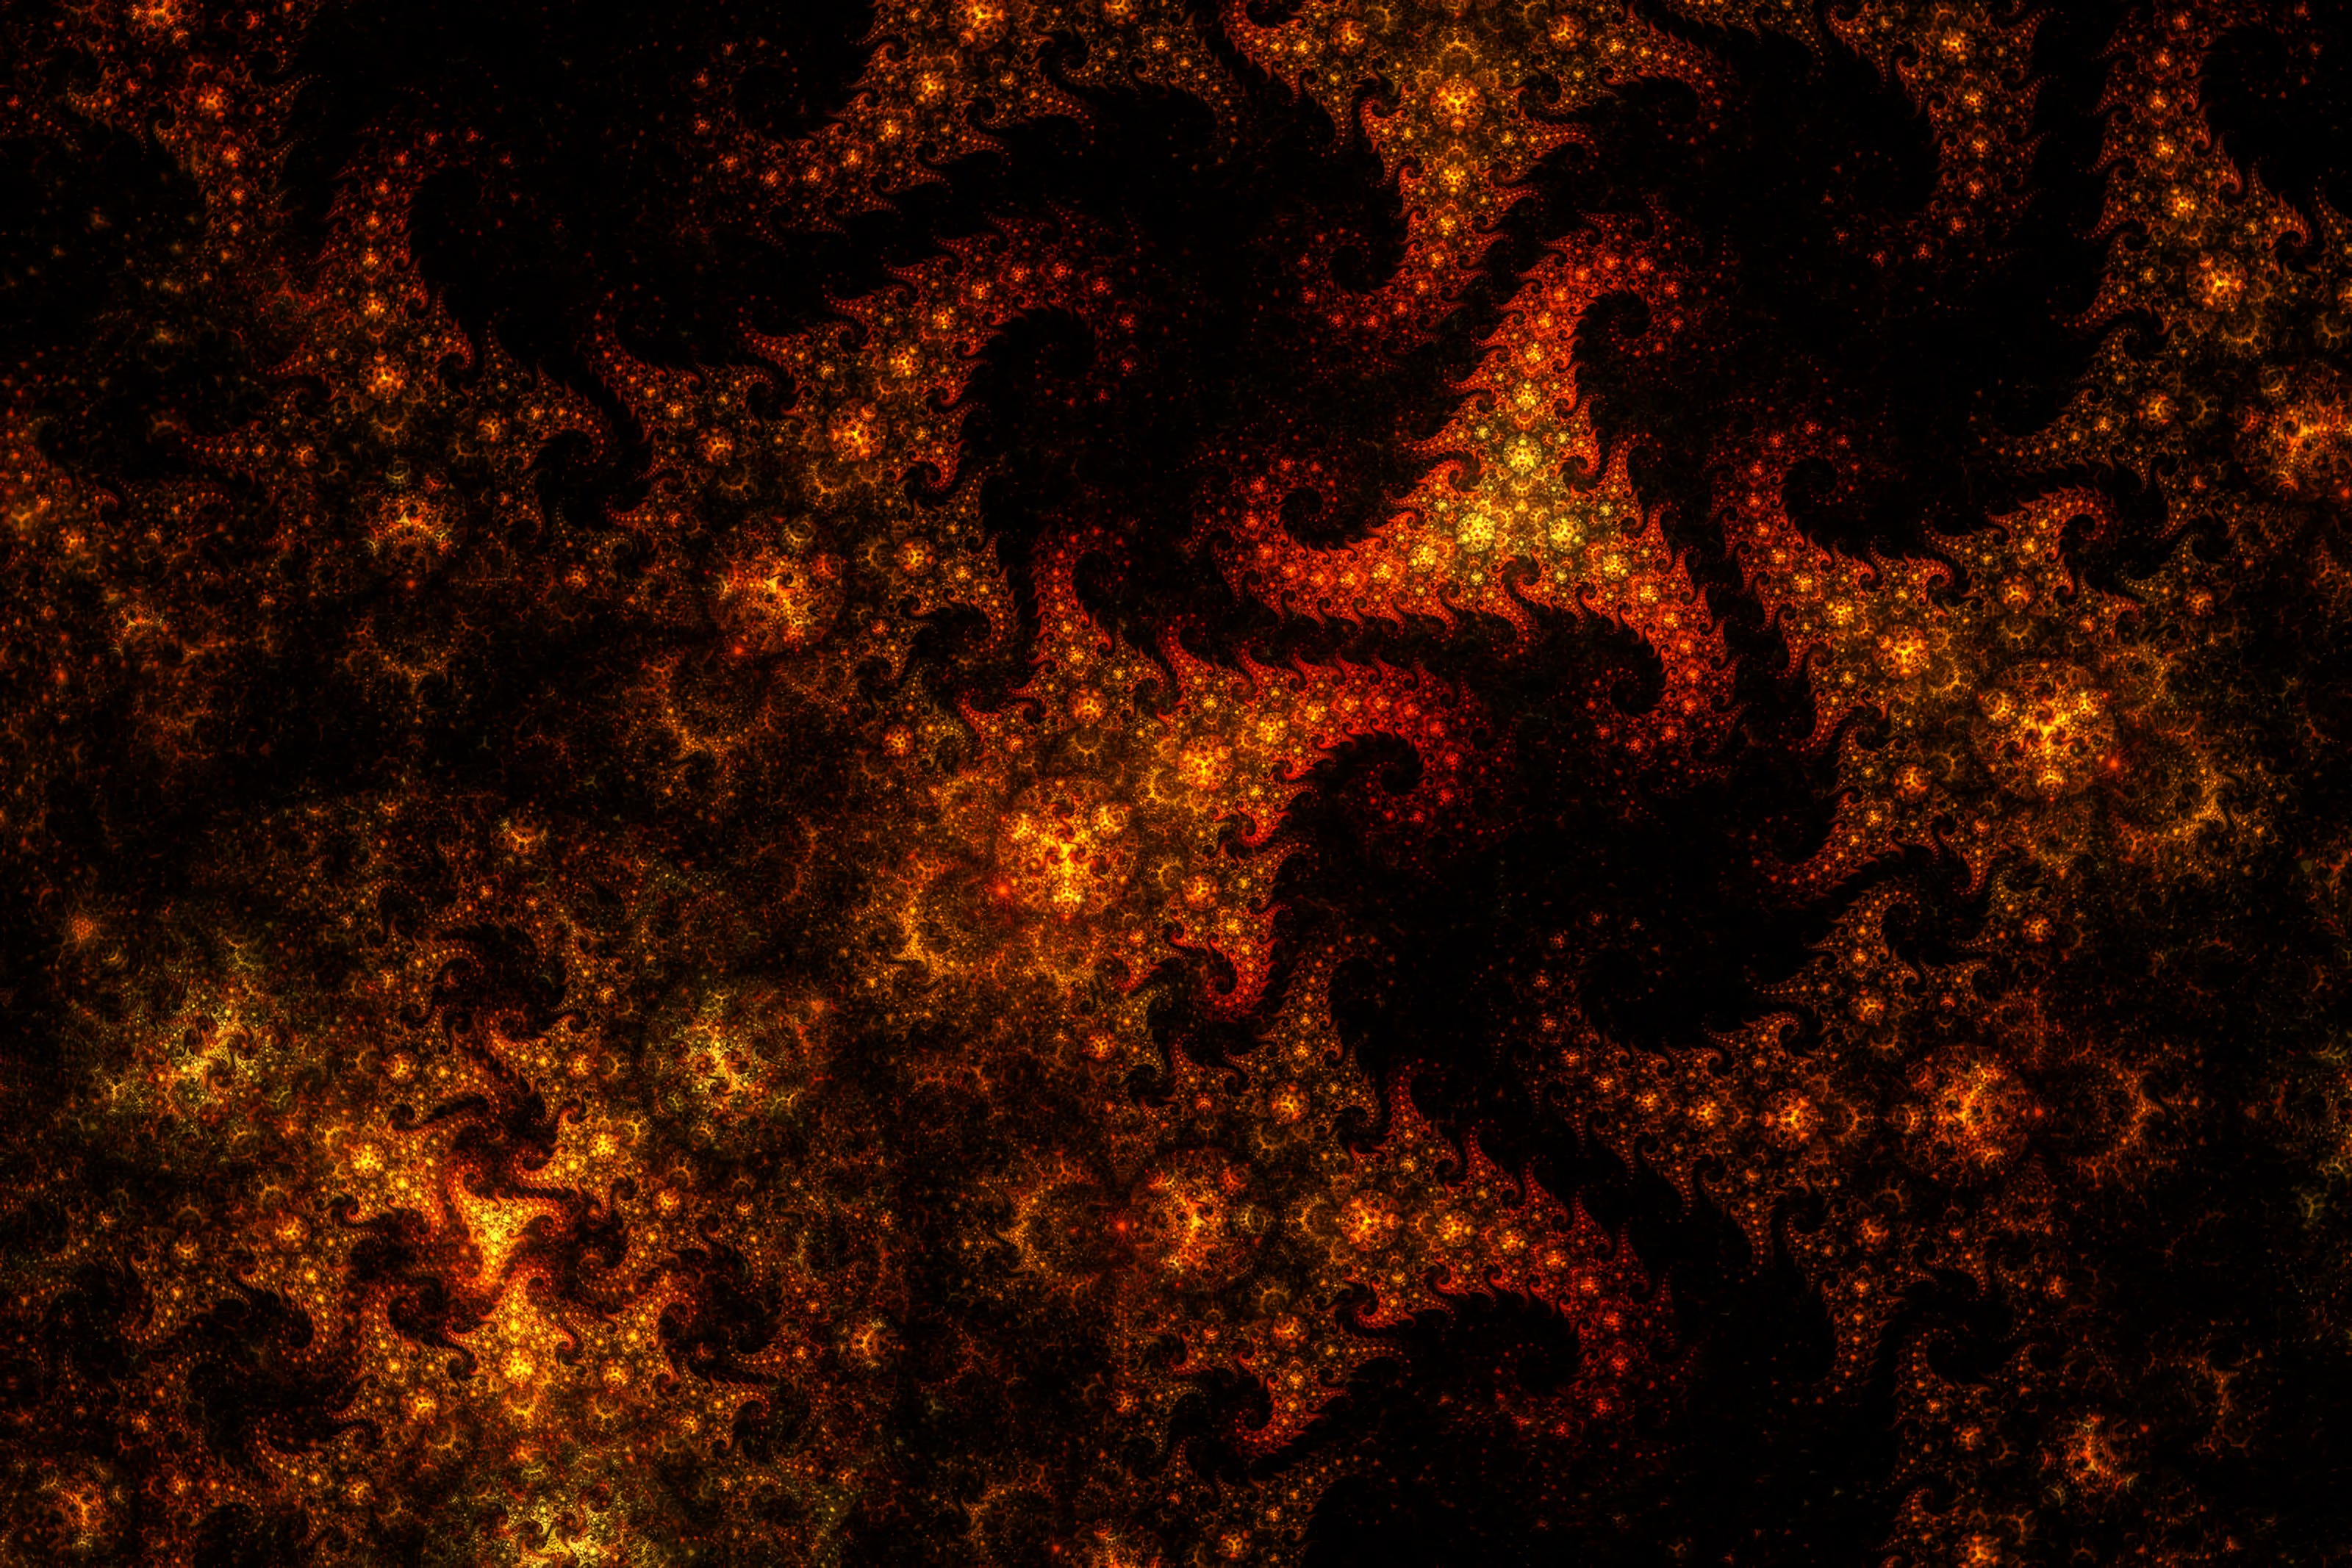 fractal, confused, curls, abstract, pattern, intricate 1080p